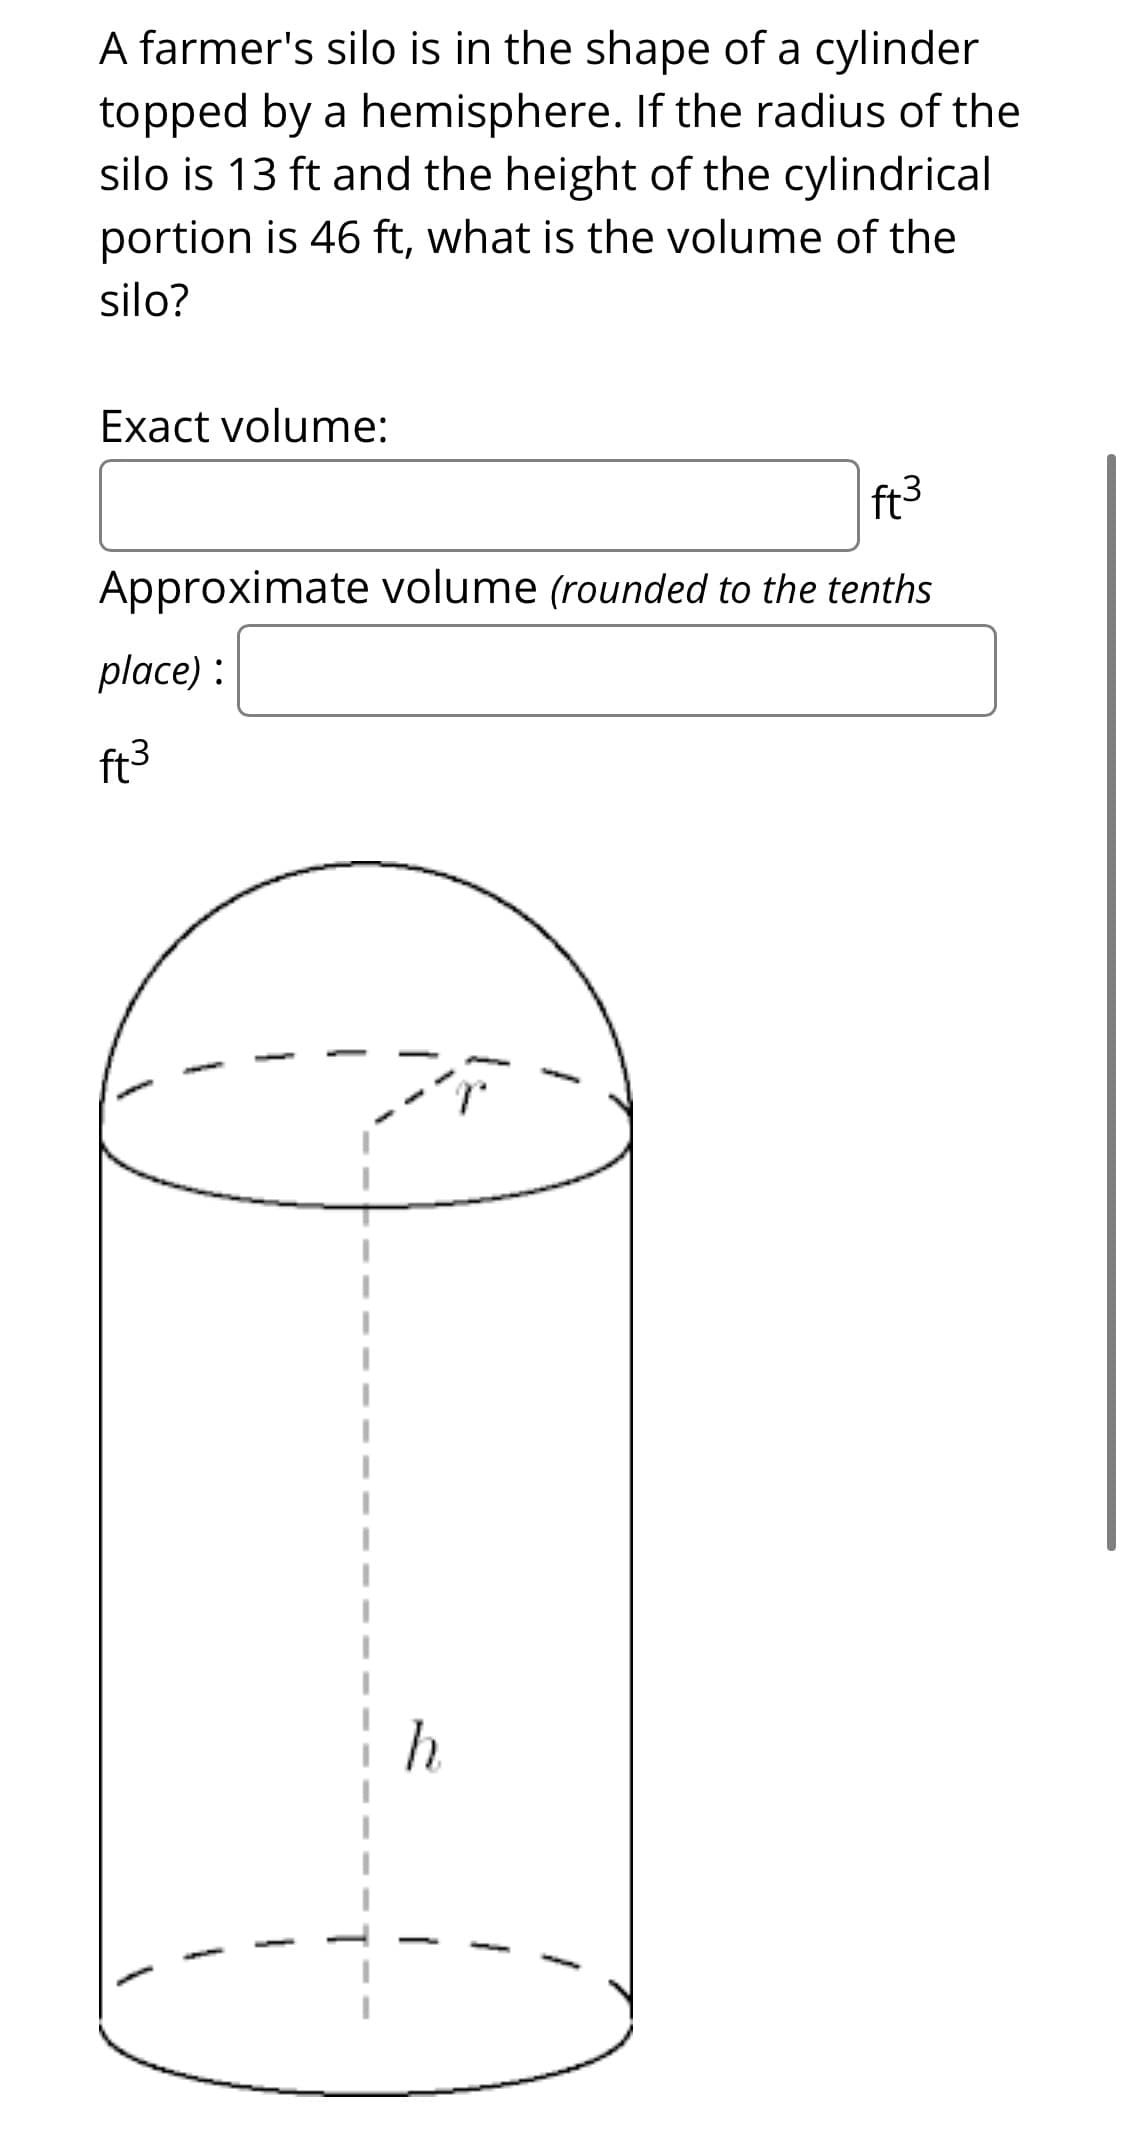 A farmer's silo is in the shape of a cylinder
topped by a hemisphere. If the radius of the
silo is 13 ft and the height of the cylindrical
portion is 46 ft, what is the volume of the
silo?
Exact volume:
ft3
Approximate volume (rounded to the tenths
place) :
ft3
